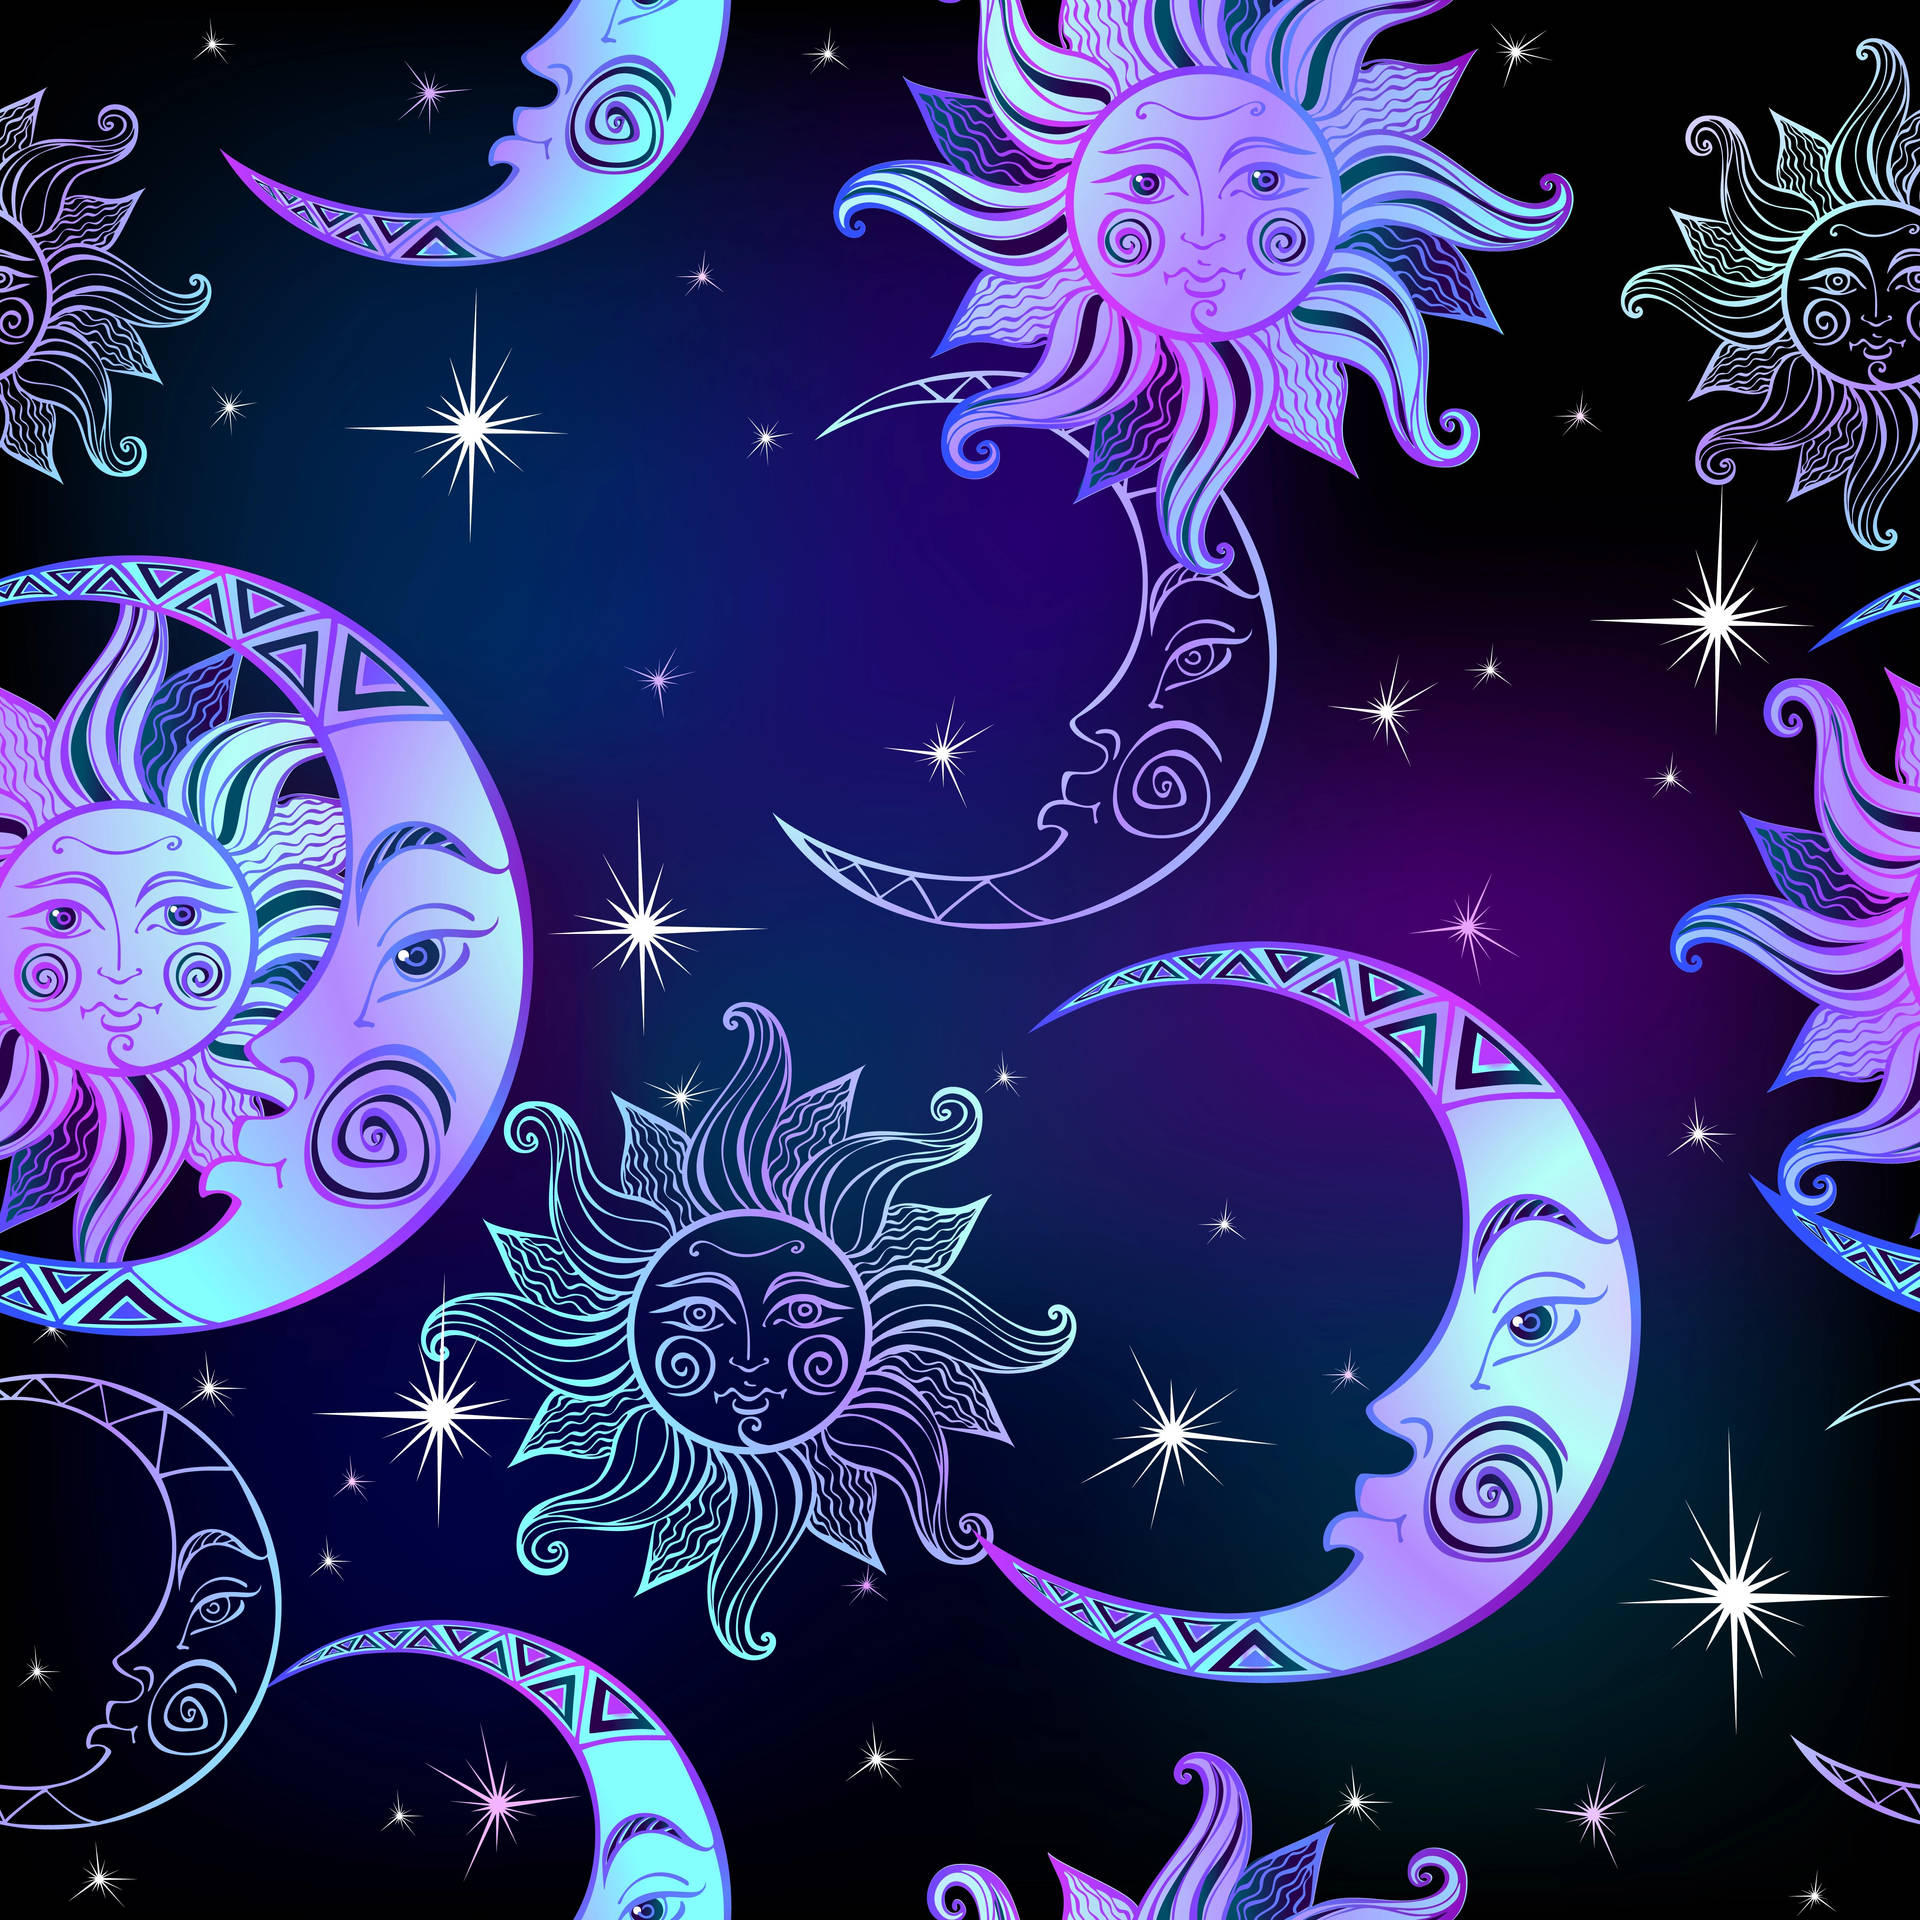 Sun and Moon Wallpapers on WallpaperDog